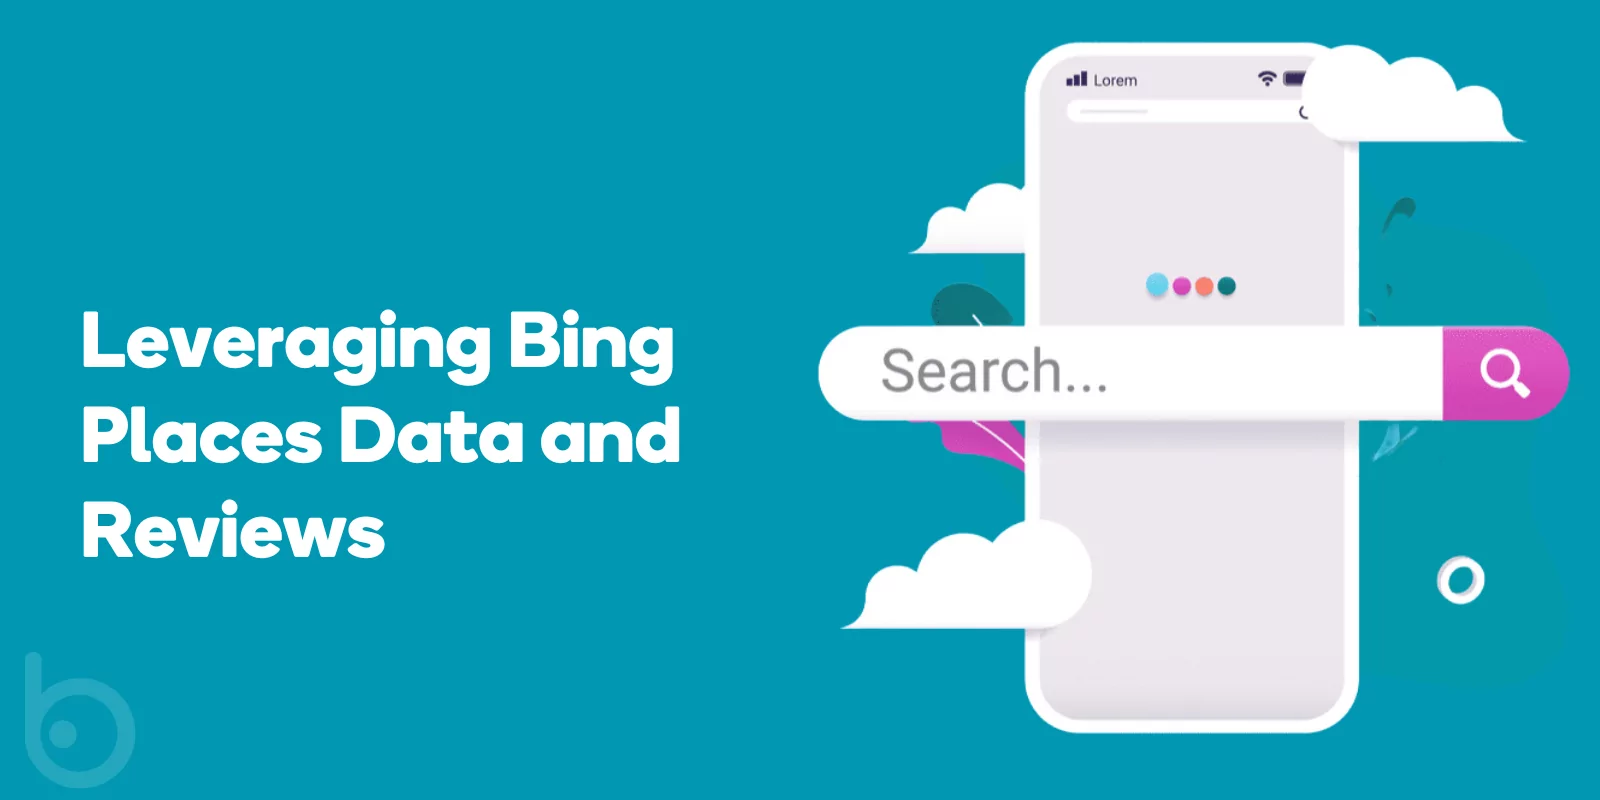 Leveraging Bing Places Data and Reviews